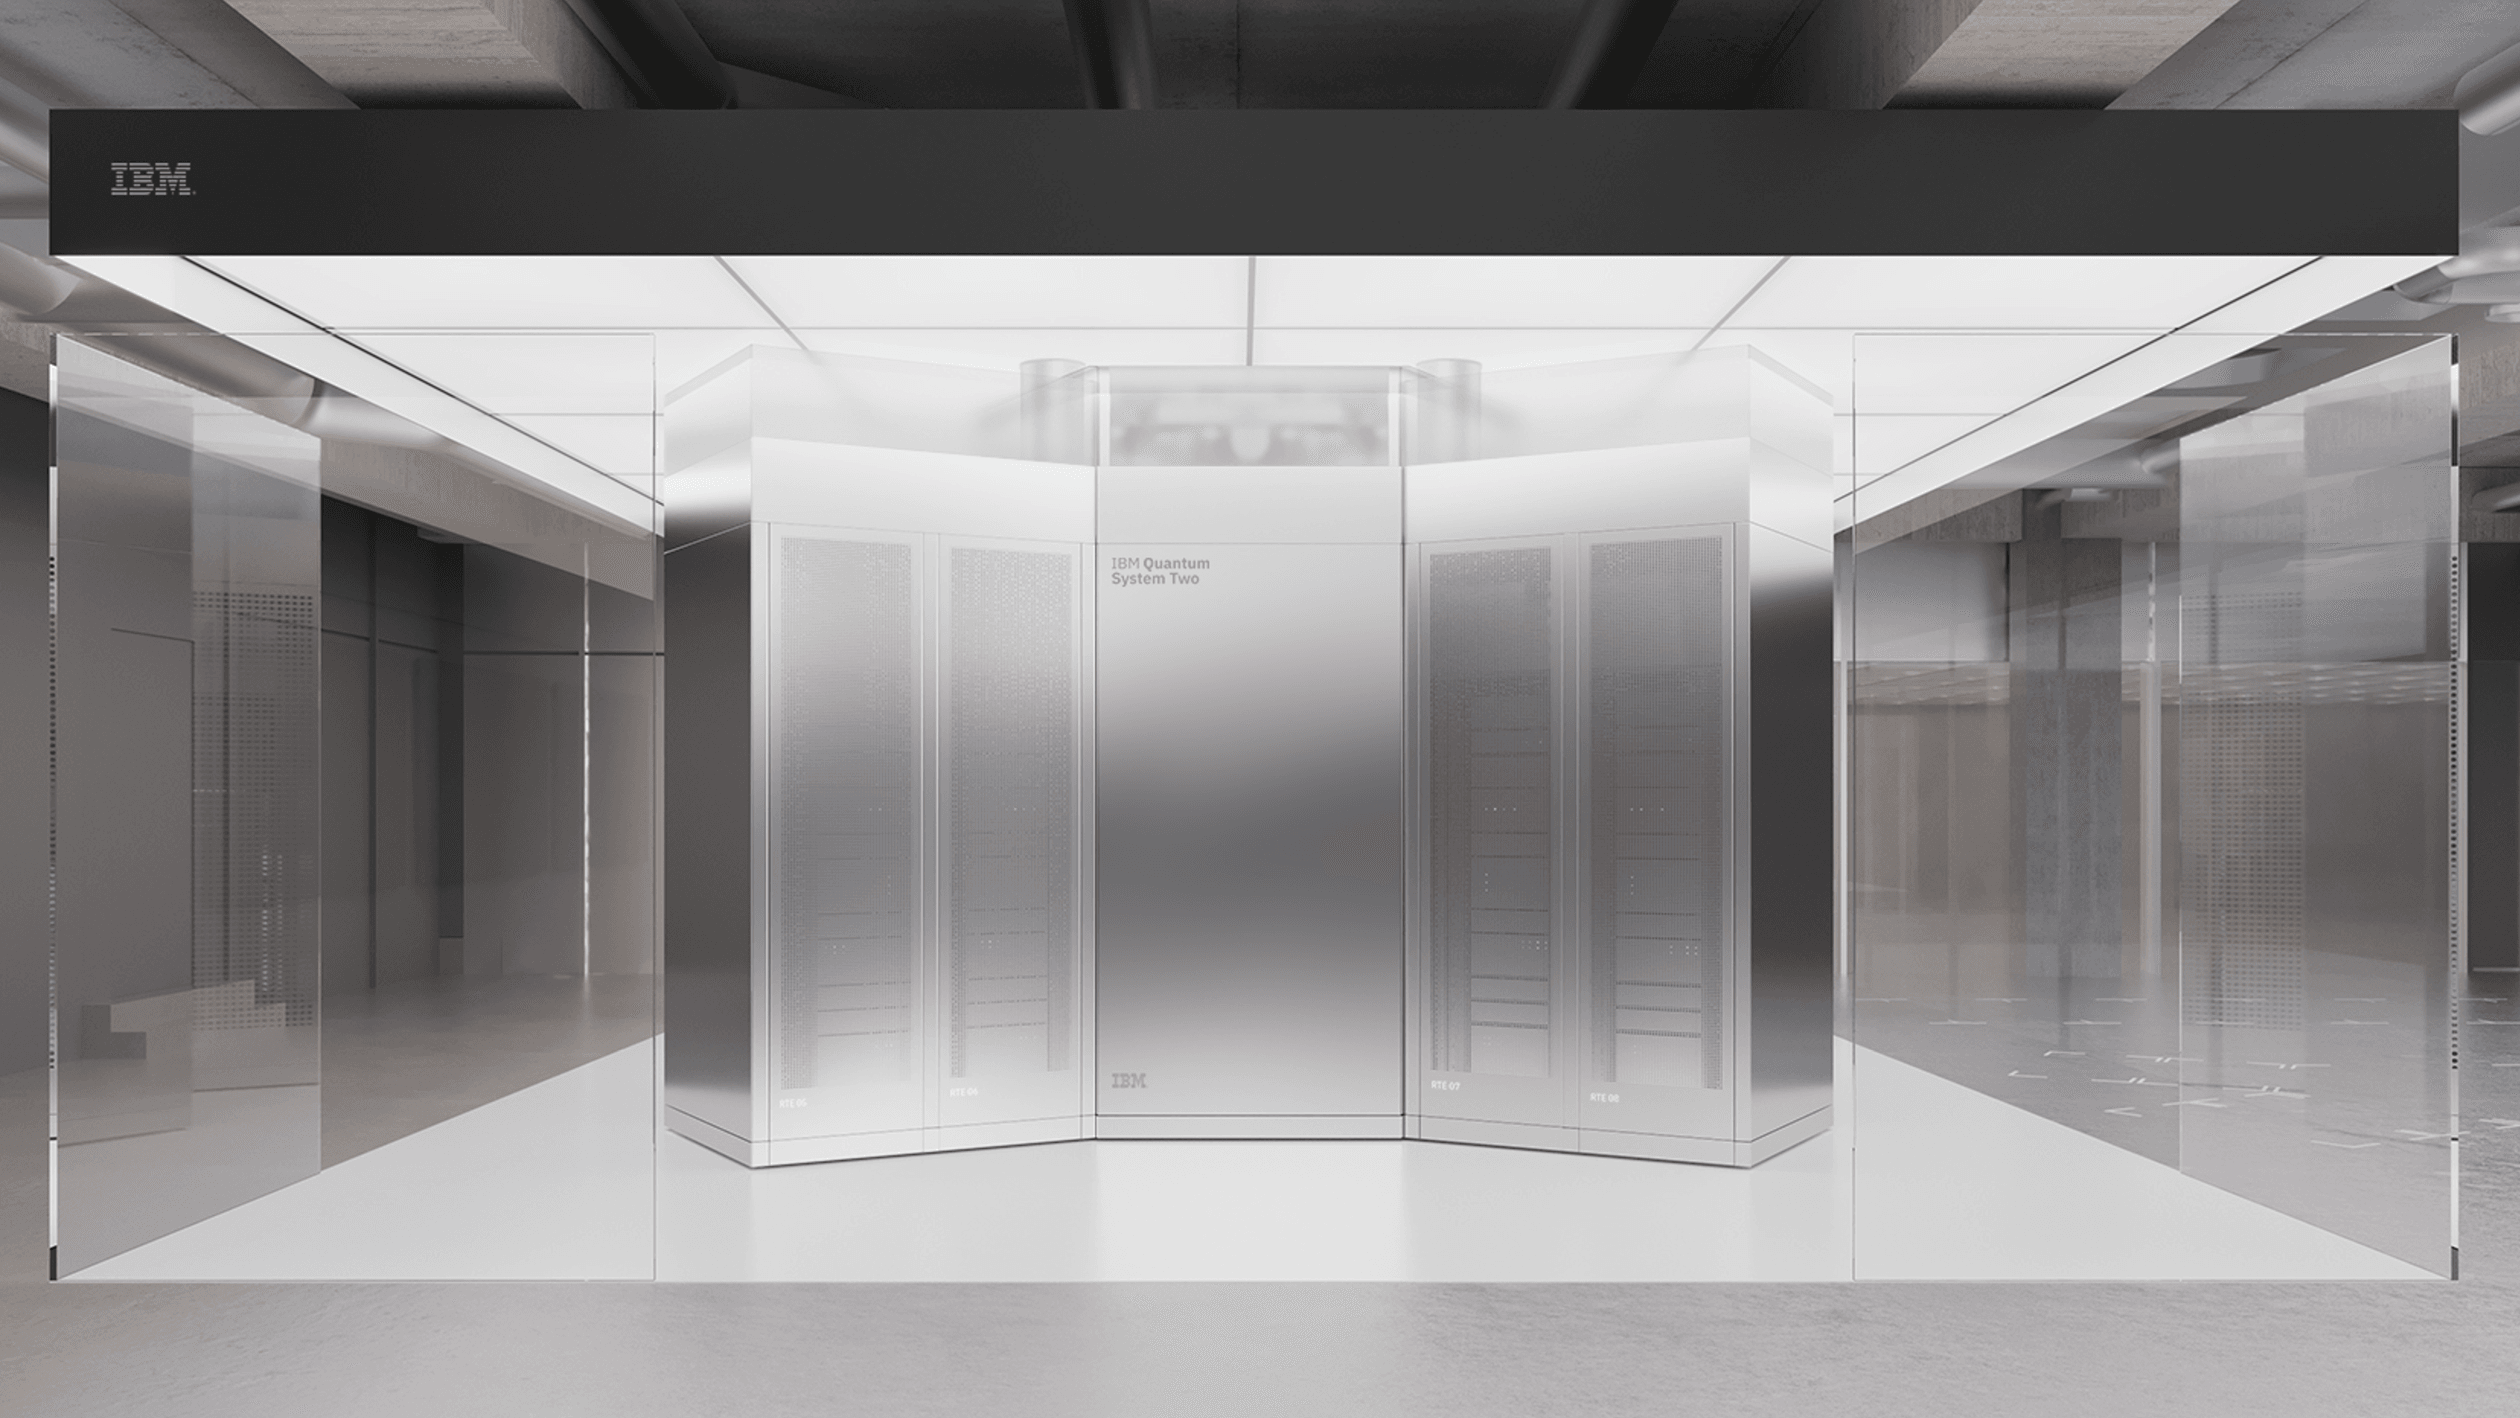 IBM Quantum System Two (rendering) is a system designed to be modular and flexible, combining multiple processors into a single system with communication links.